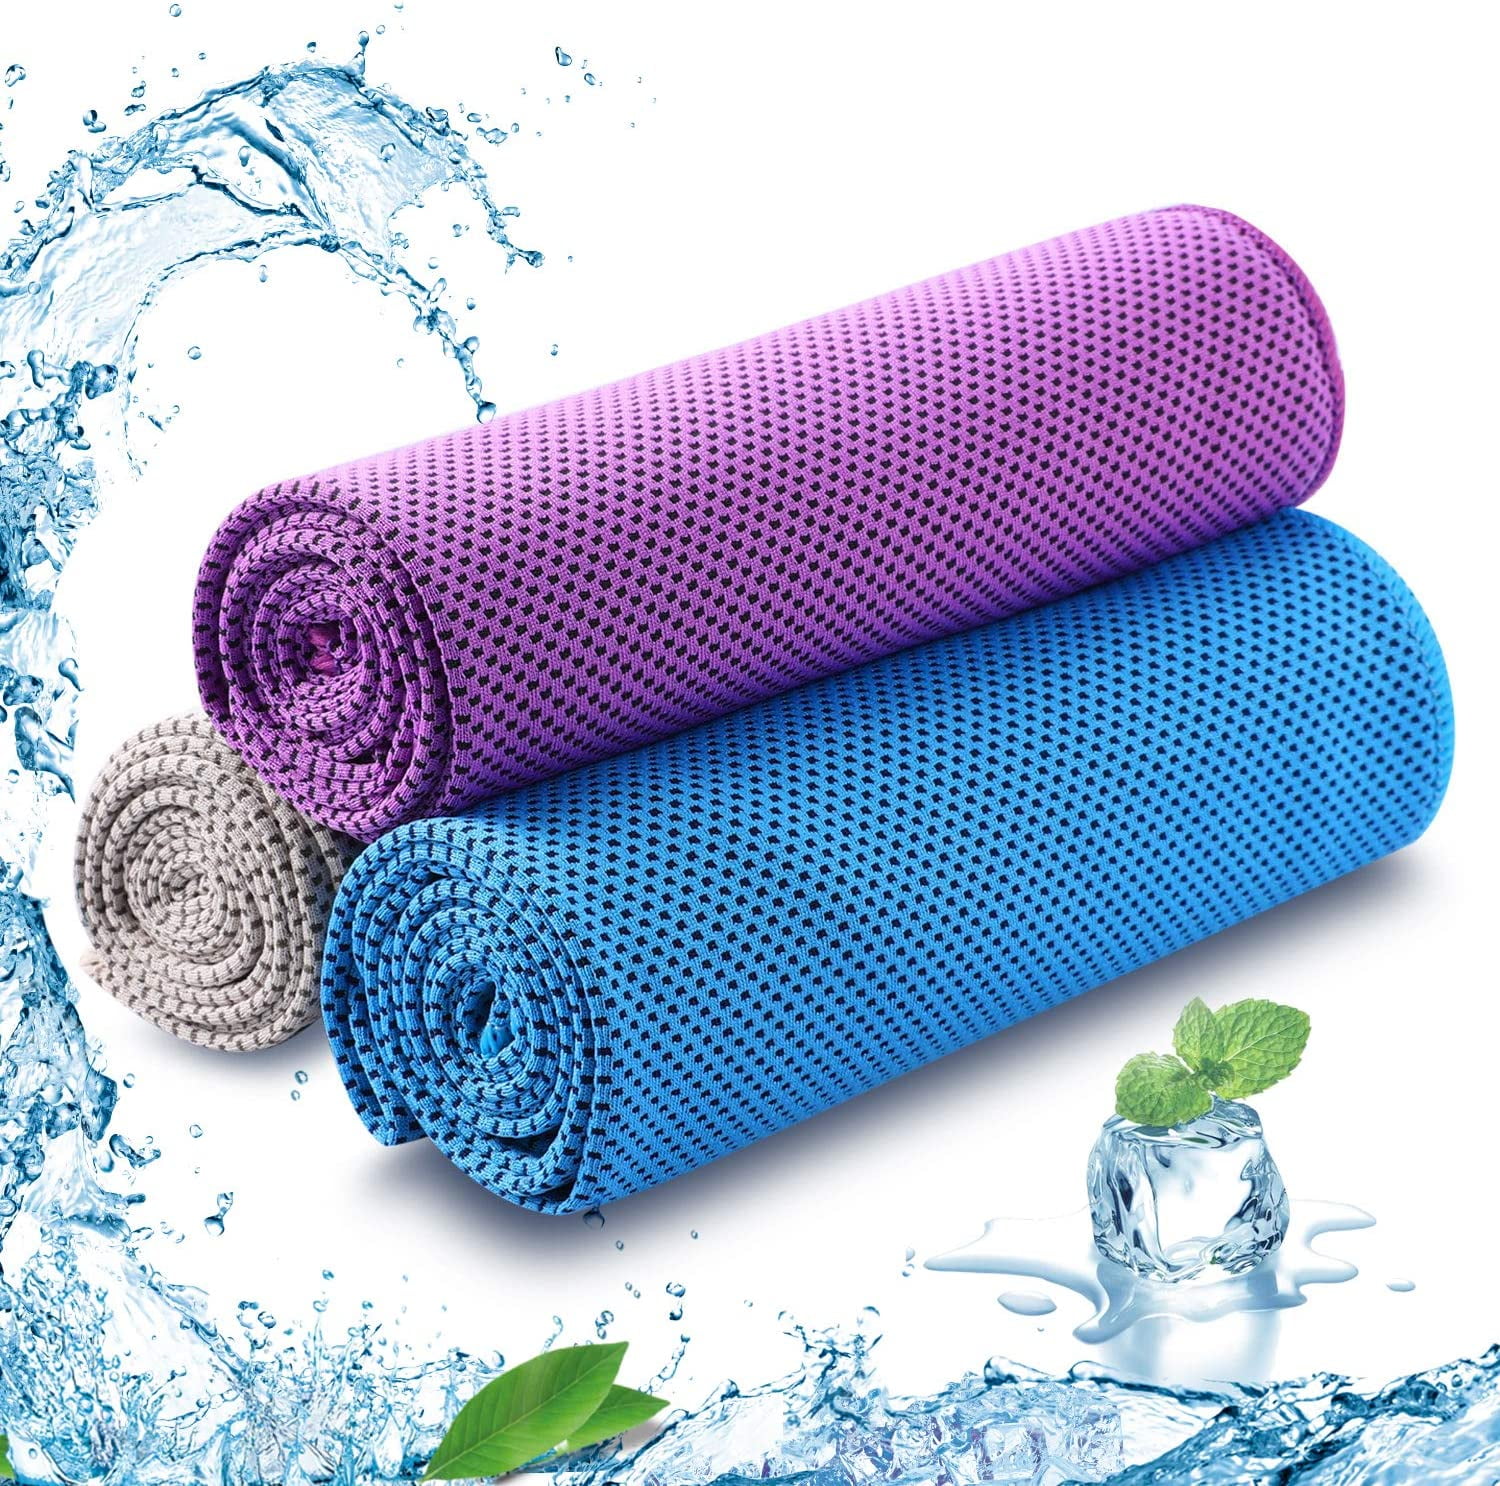 Yoga Microfiber Soft Breathable Gym Towel Cooling Towel 2 Pack Ice Towel Fitness Chilly Workout Towel Snap Cooling Towel for Sports Cold Sports Towel Cooling Towel for Neck Instant Relief Neck 